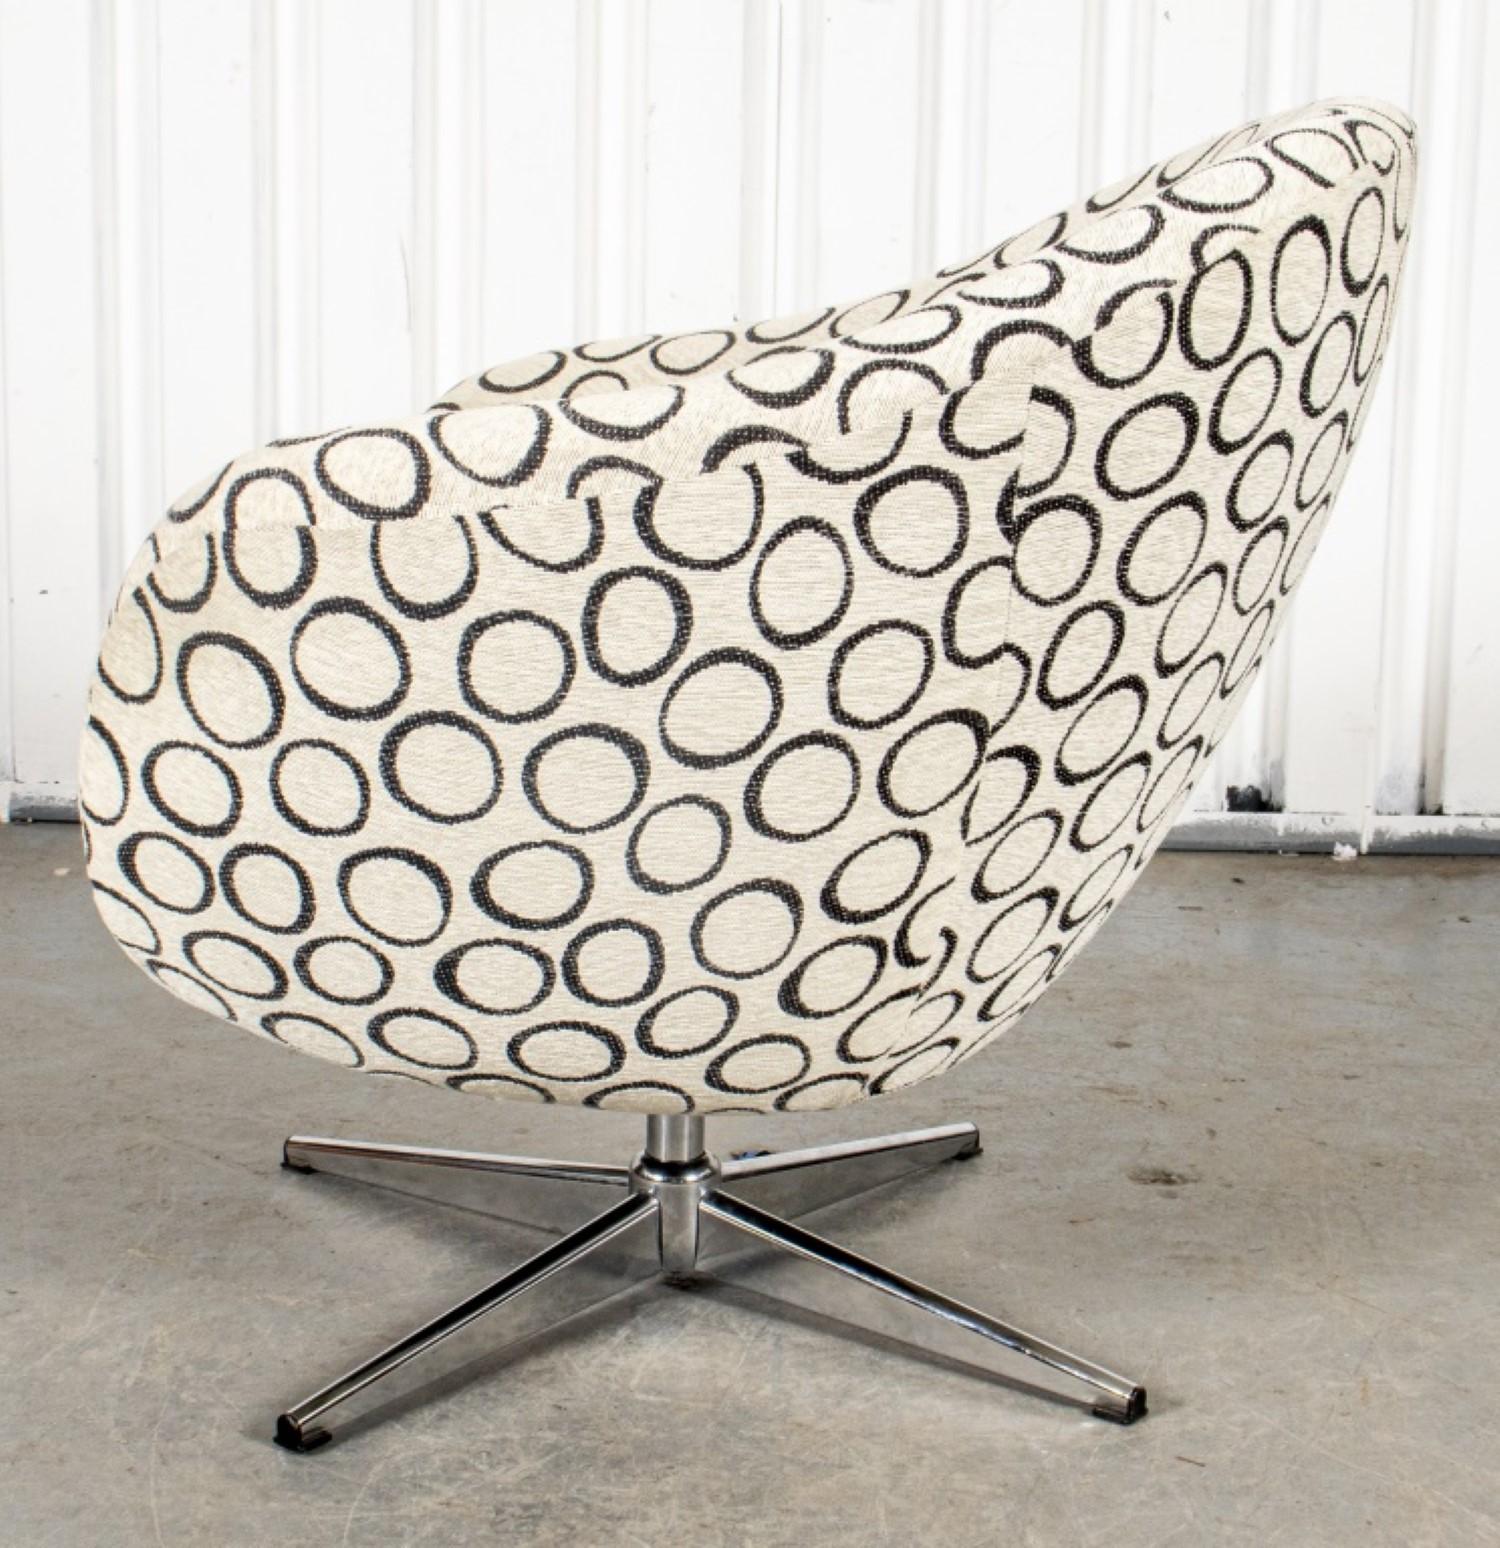 Overman Mid-Century Modern swivel lounge chair with abstract circle upholstery.

Dimensions: 29 inches high, 33 inches wide, and 29 inches deep.
Seat height: 16 inches.